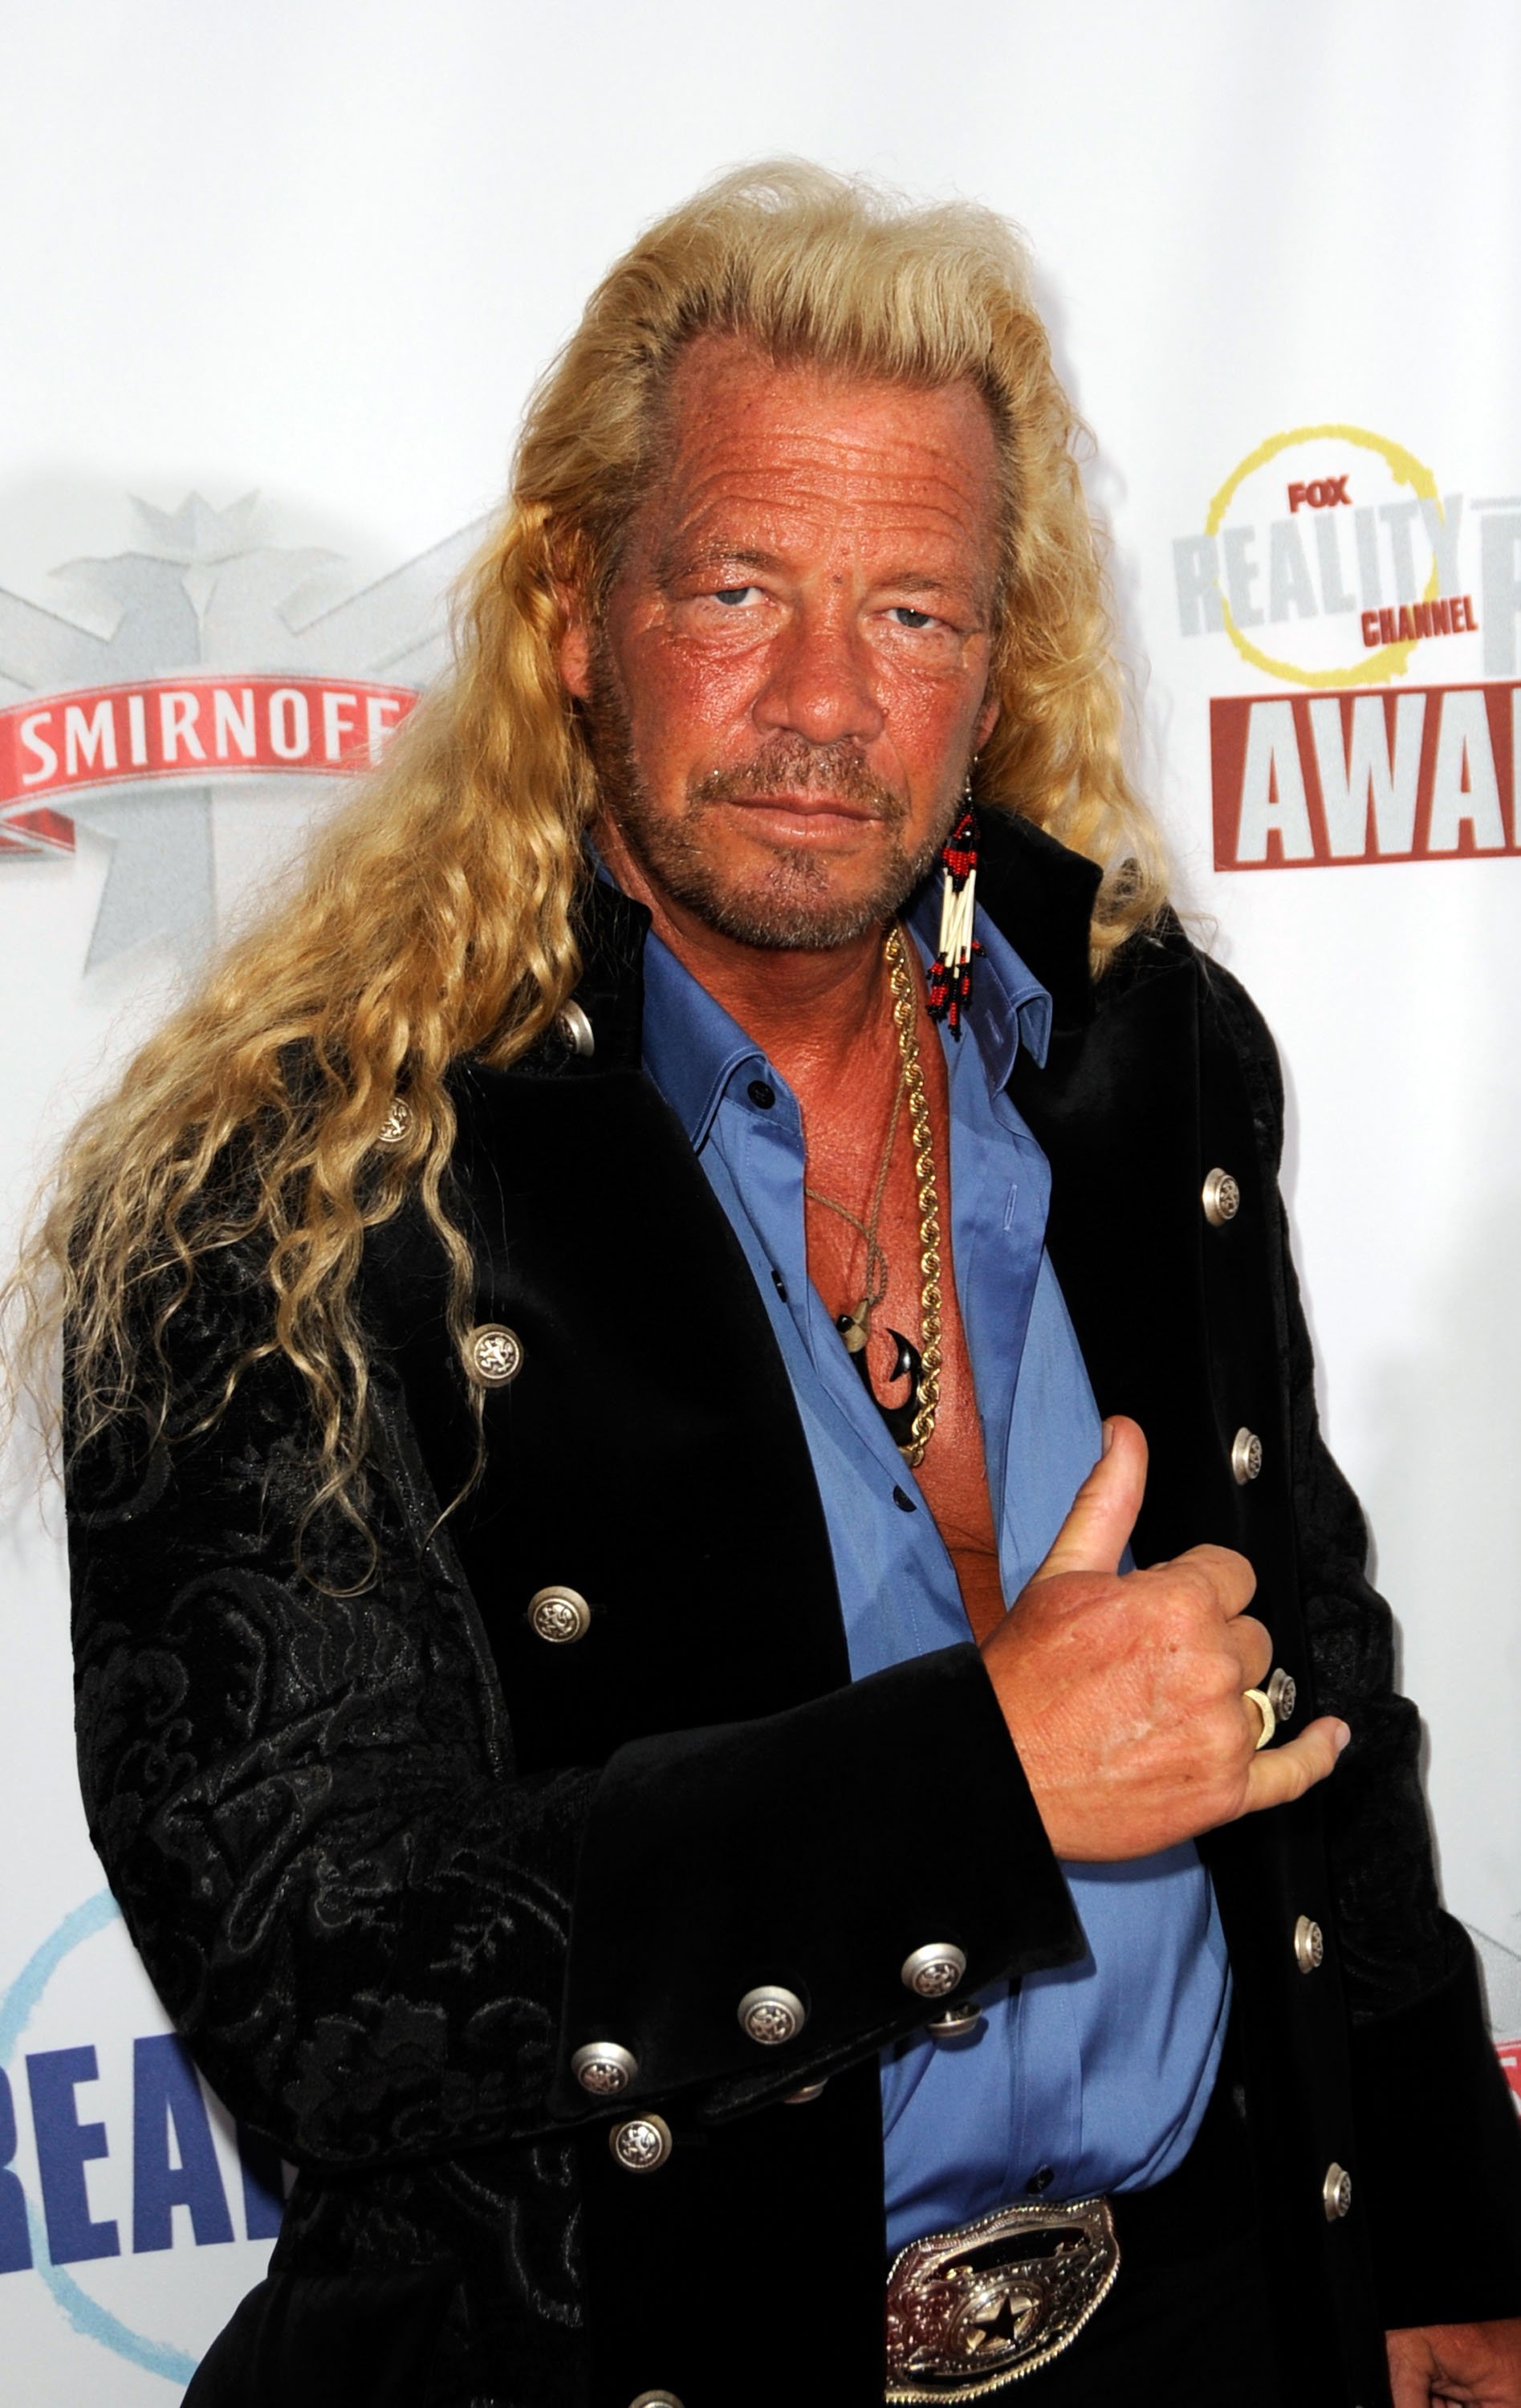  Duane "Dog" Chapman arrives at the Fox Reality Channel Really Awards on September 24, 2008, in Hollywood California. | Source: Getty Images.